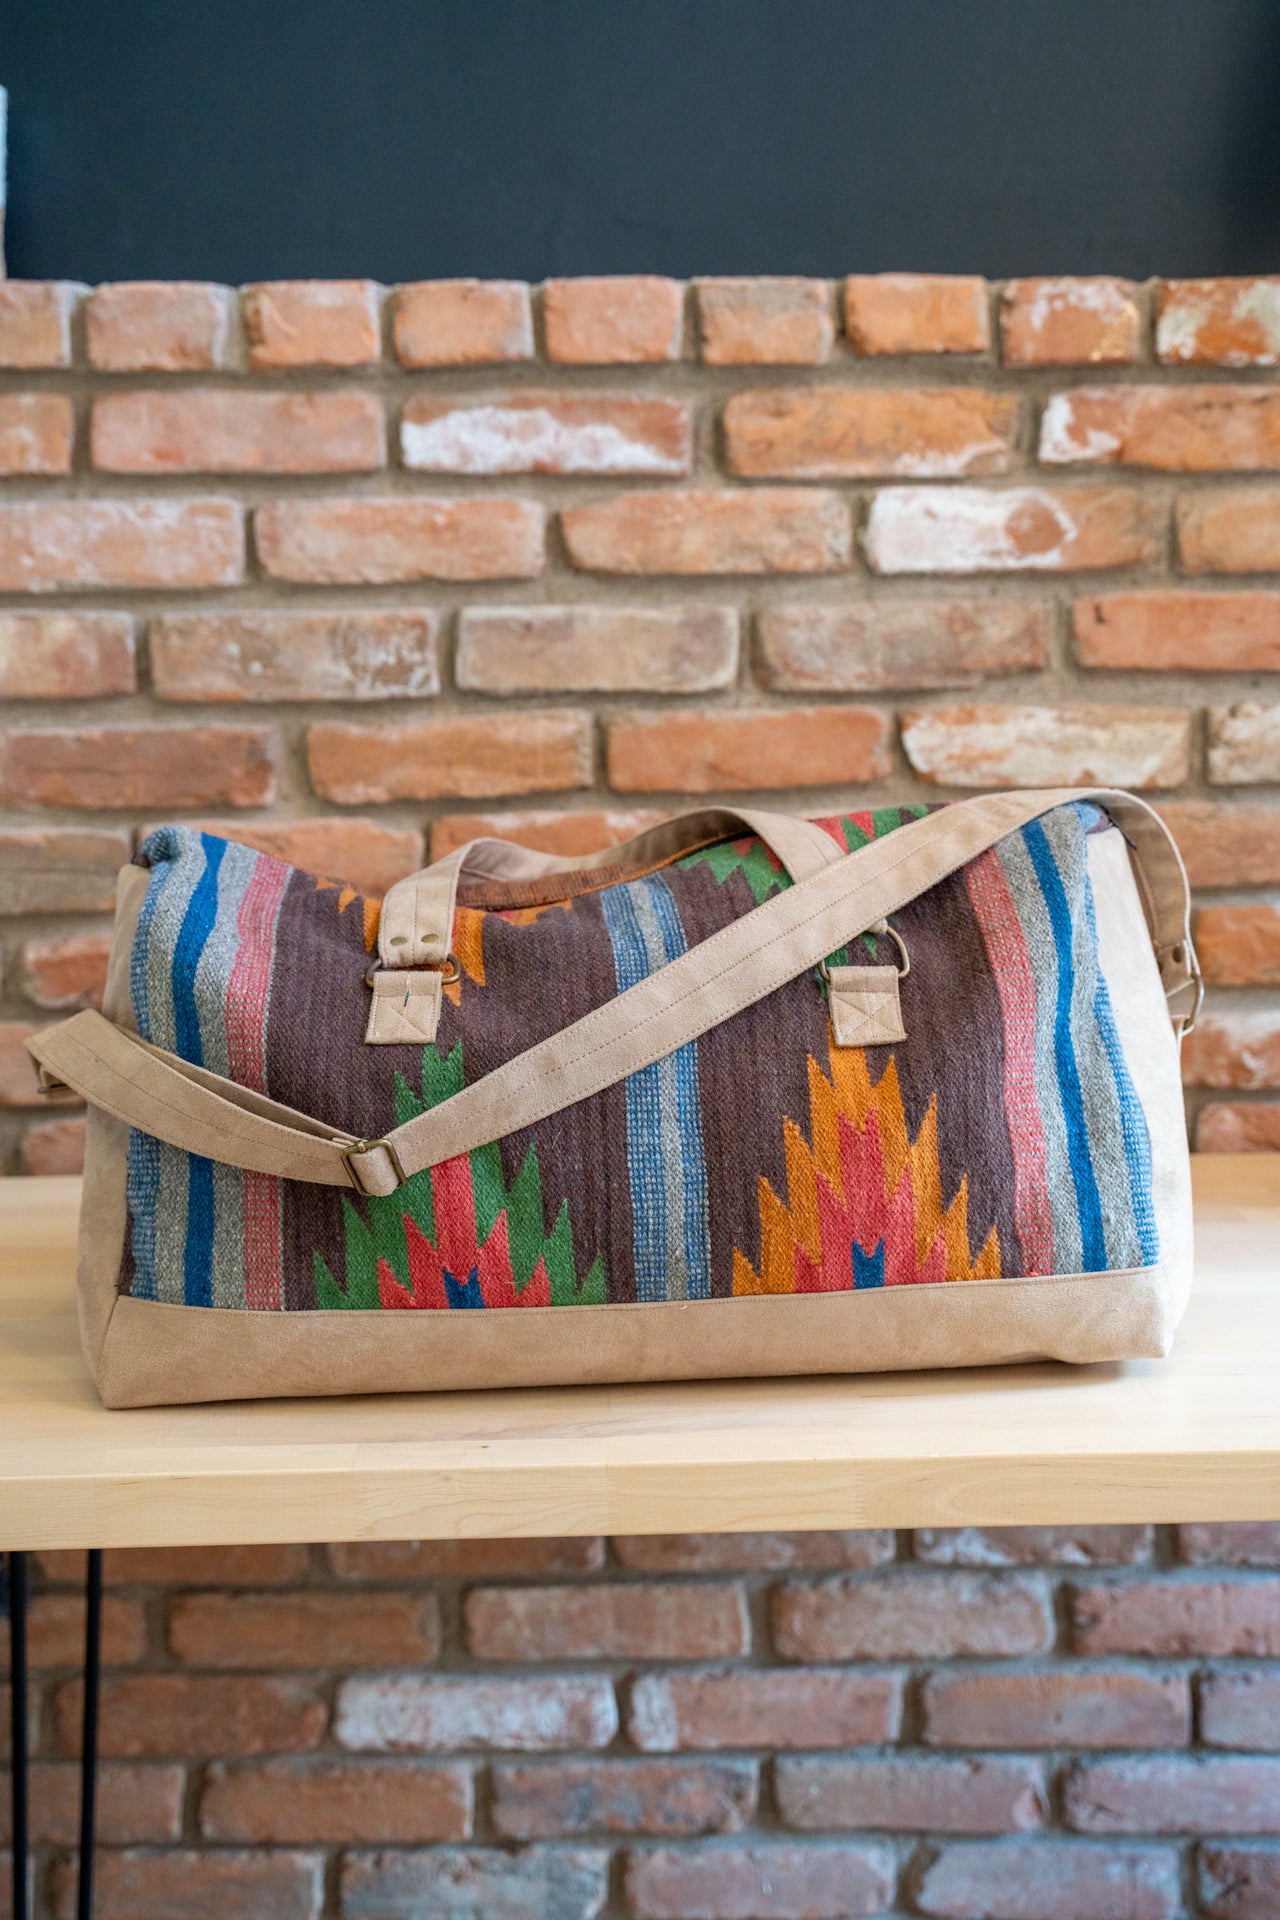 Pedal Loom Woven Bags